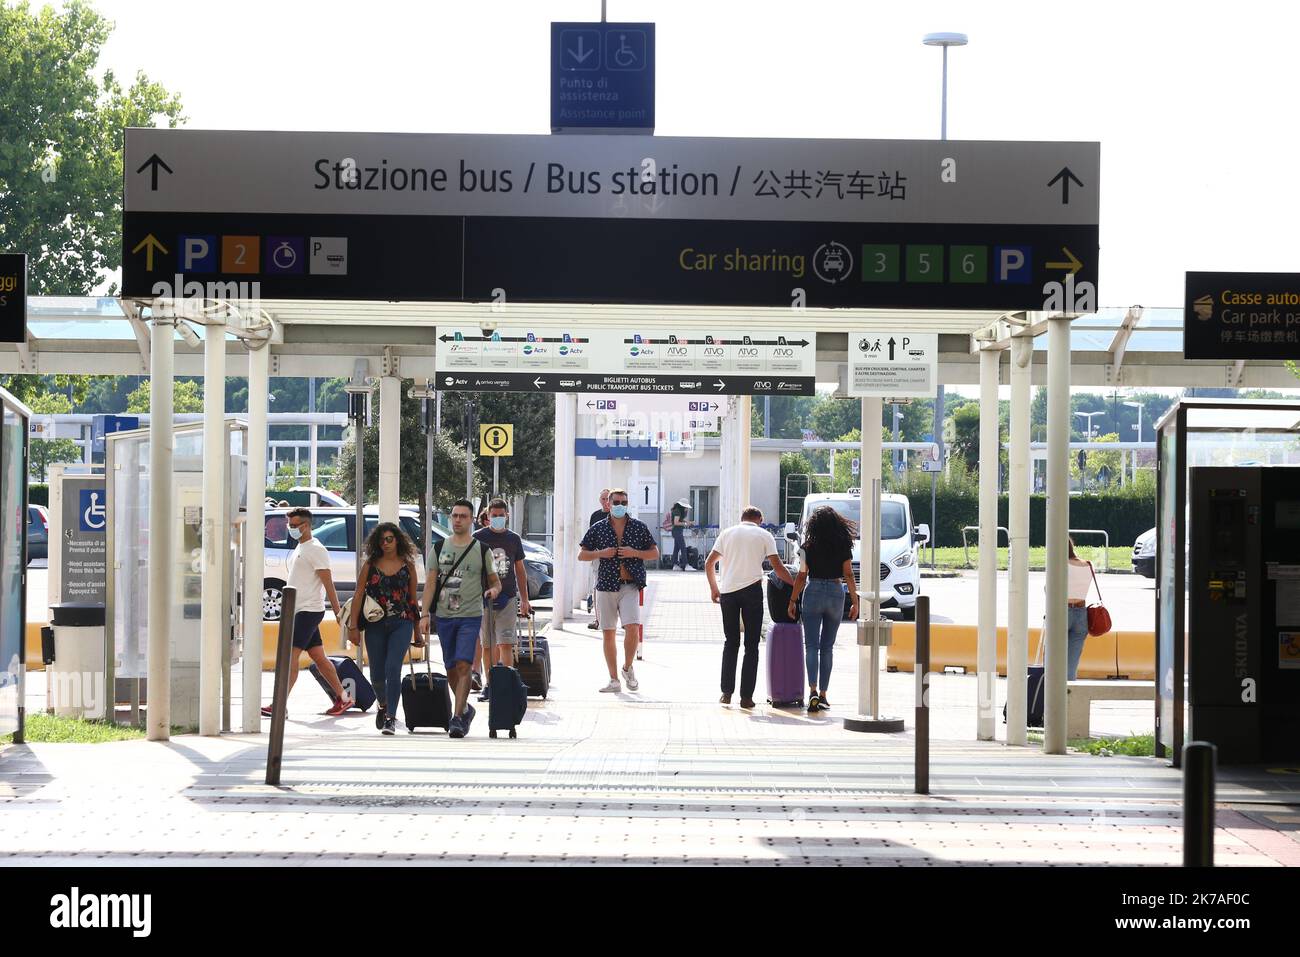 ©Pierre Teyssot/MAXPPP ; Coronavirus Outbreak - Marco Polo Airport on 12th of August 2020, Venice, Italy. A reduction in air traffic and the number of tourists coming by air and transiting through the airport to visit the Serenissima is being observed due to the Covid-19 pandemic. The tourism economy is in deep crisis. Access to the bus station. Â© Pierre Teyssot / Maxppp  Stock Photo